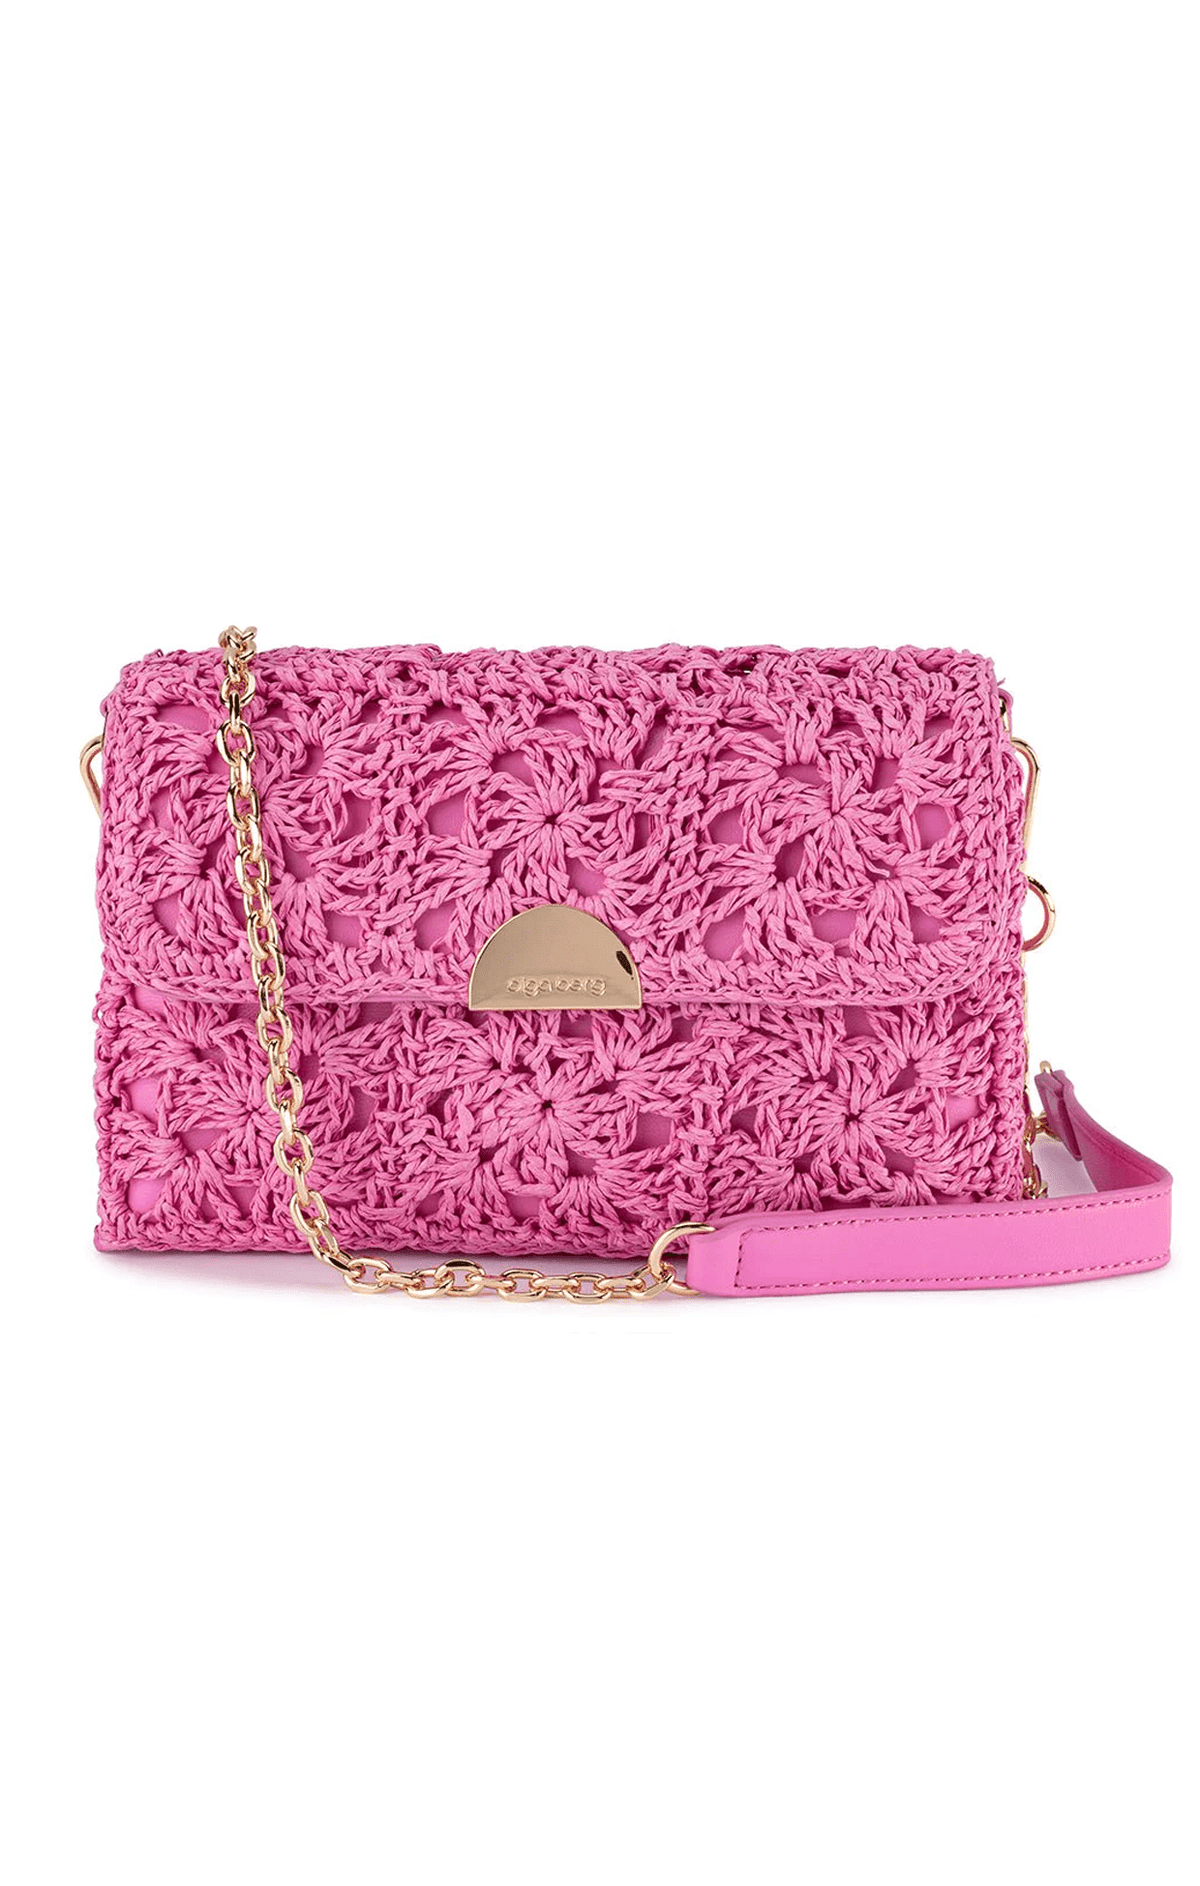 Pedro Pouch Bag (Pink)